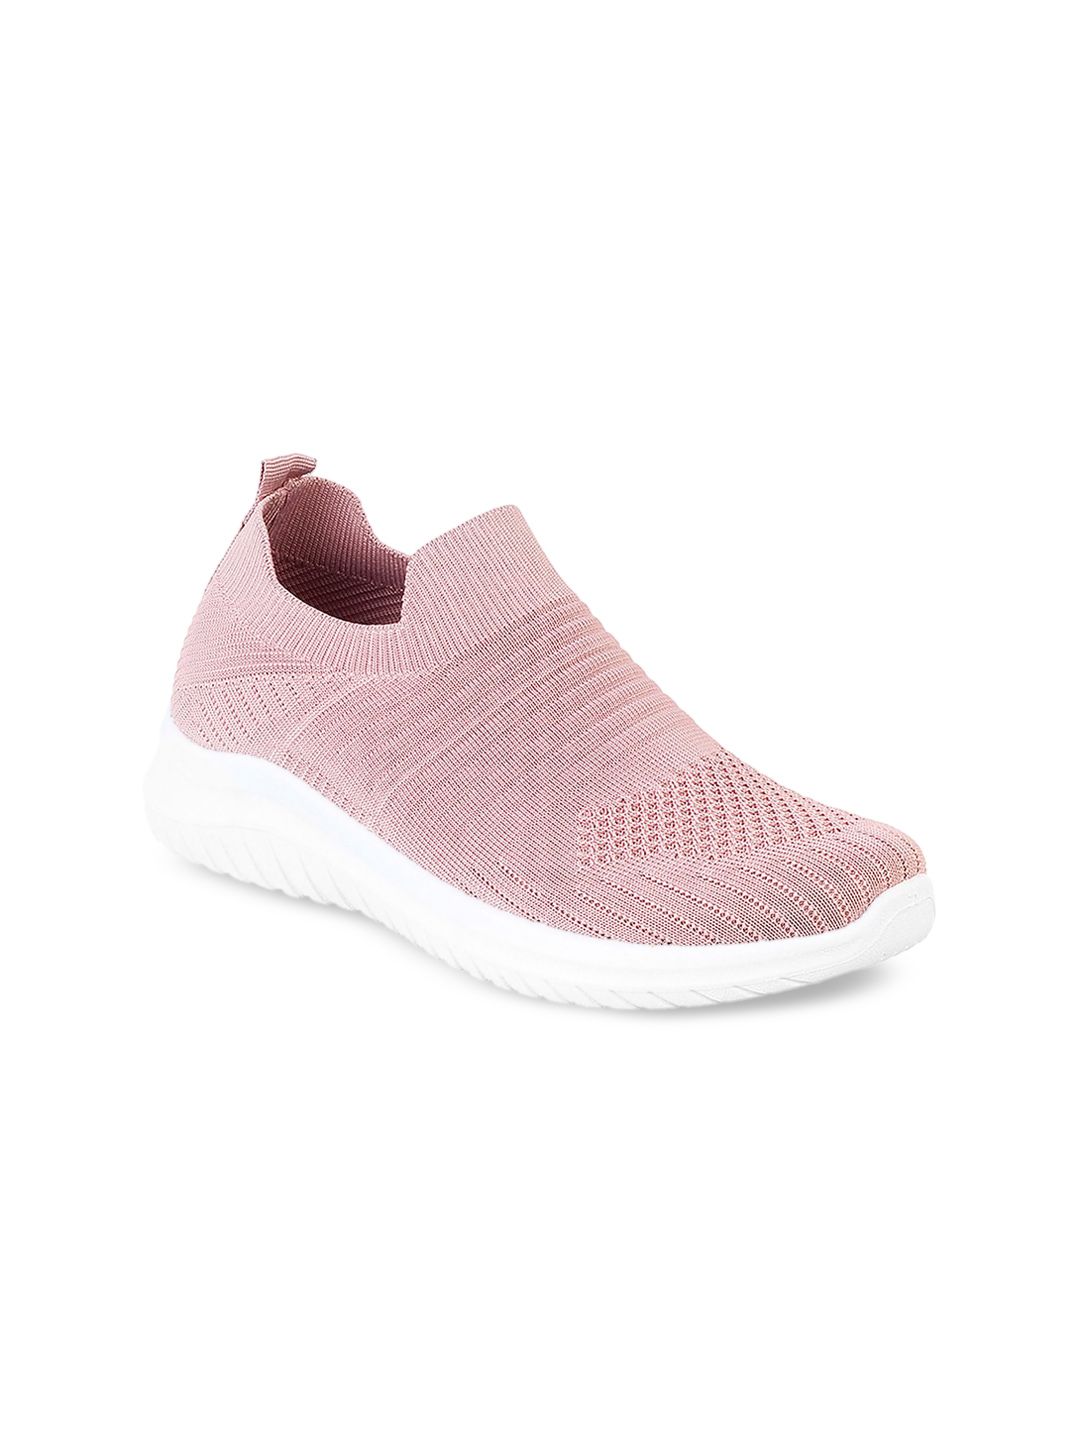 WALKWAY by Metro Women Peach-Coloured Woven Design Slip-On Sneakers Price in India